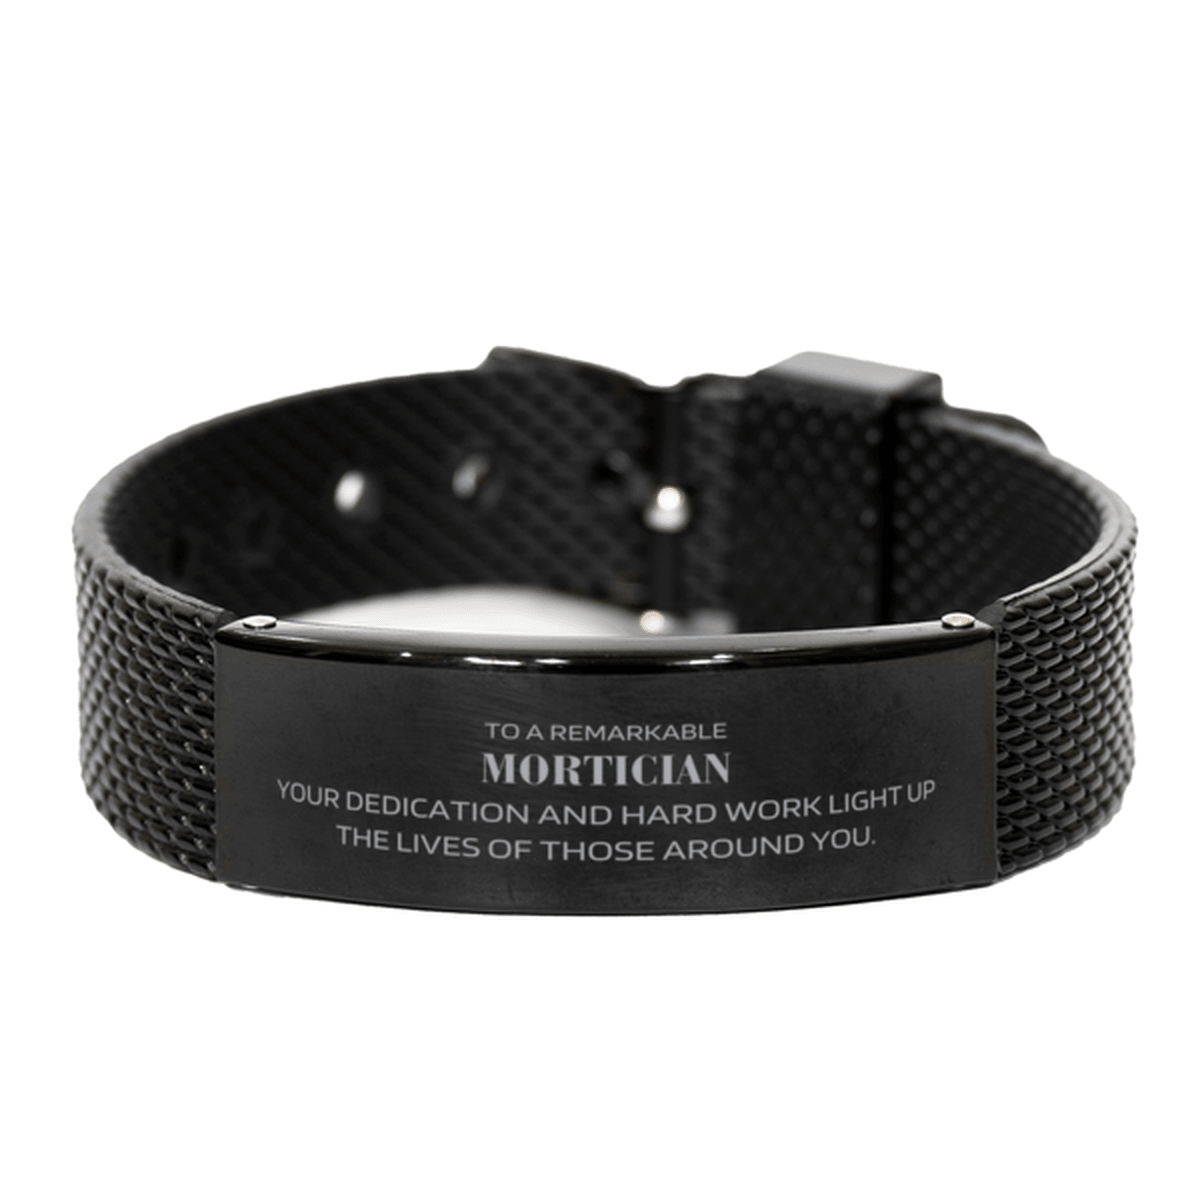 Remarkable Mortician Gifts, Your dedication and hard work, Inspirational Birthday Christmas Unique Black Shark Mesh Bracelet For Mortician, Coworkers, Men, Women, Friends - Mallard Moon Gift Shop